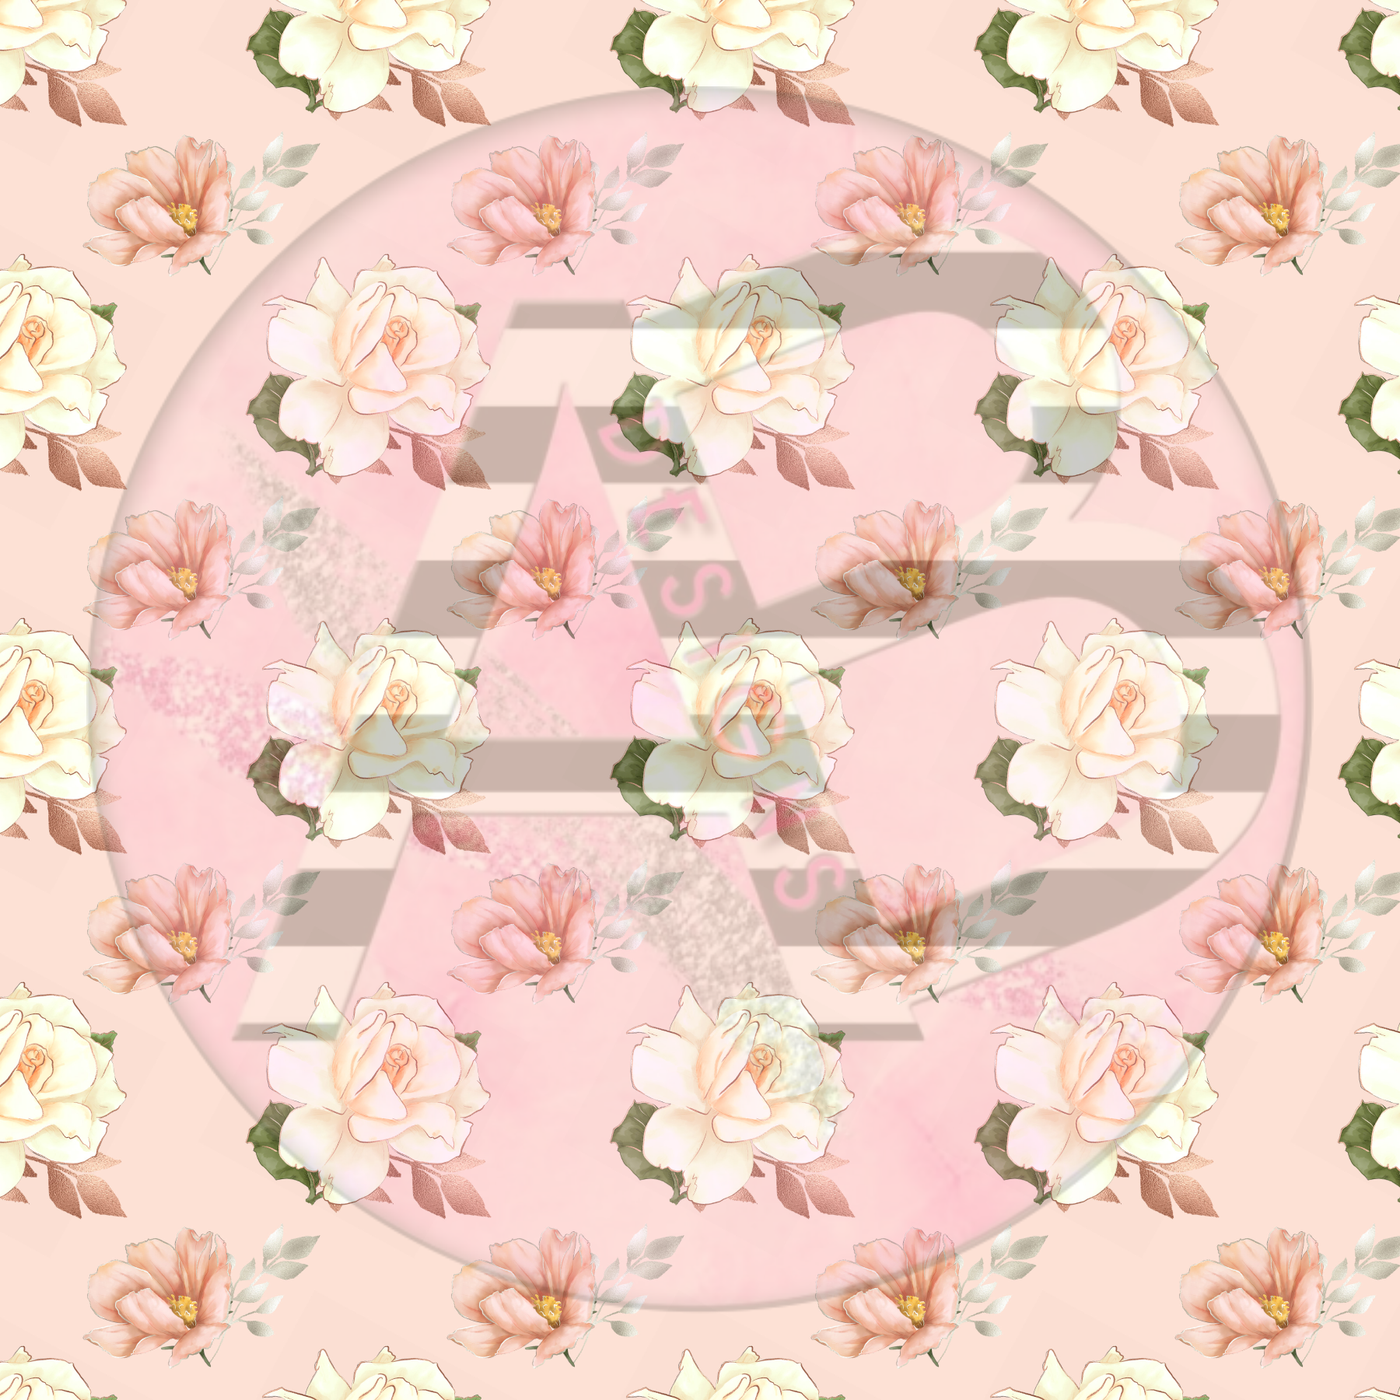 Adhesive Patterned Vinyl - Blush and Gold Floral 11